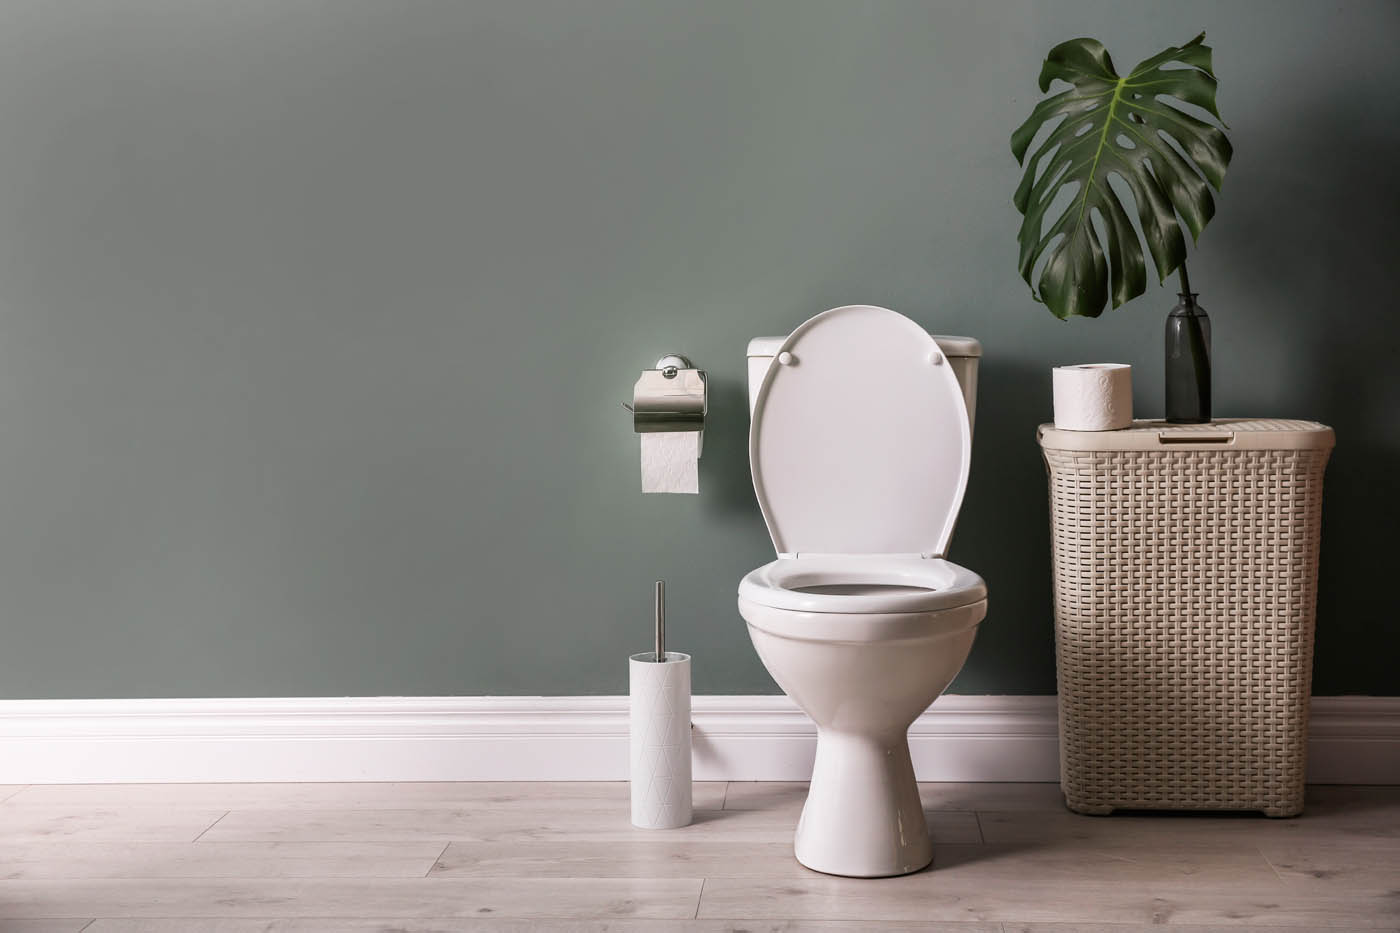 A toilet against a gray wall - emergency plumbing provided by WyattWorks in Ohio & North Carolina